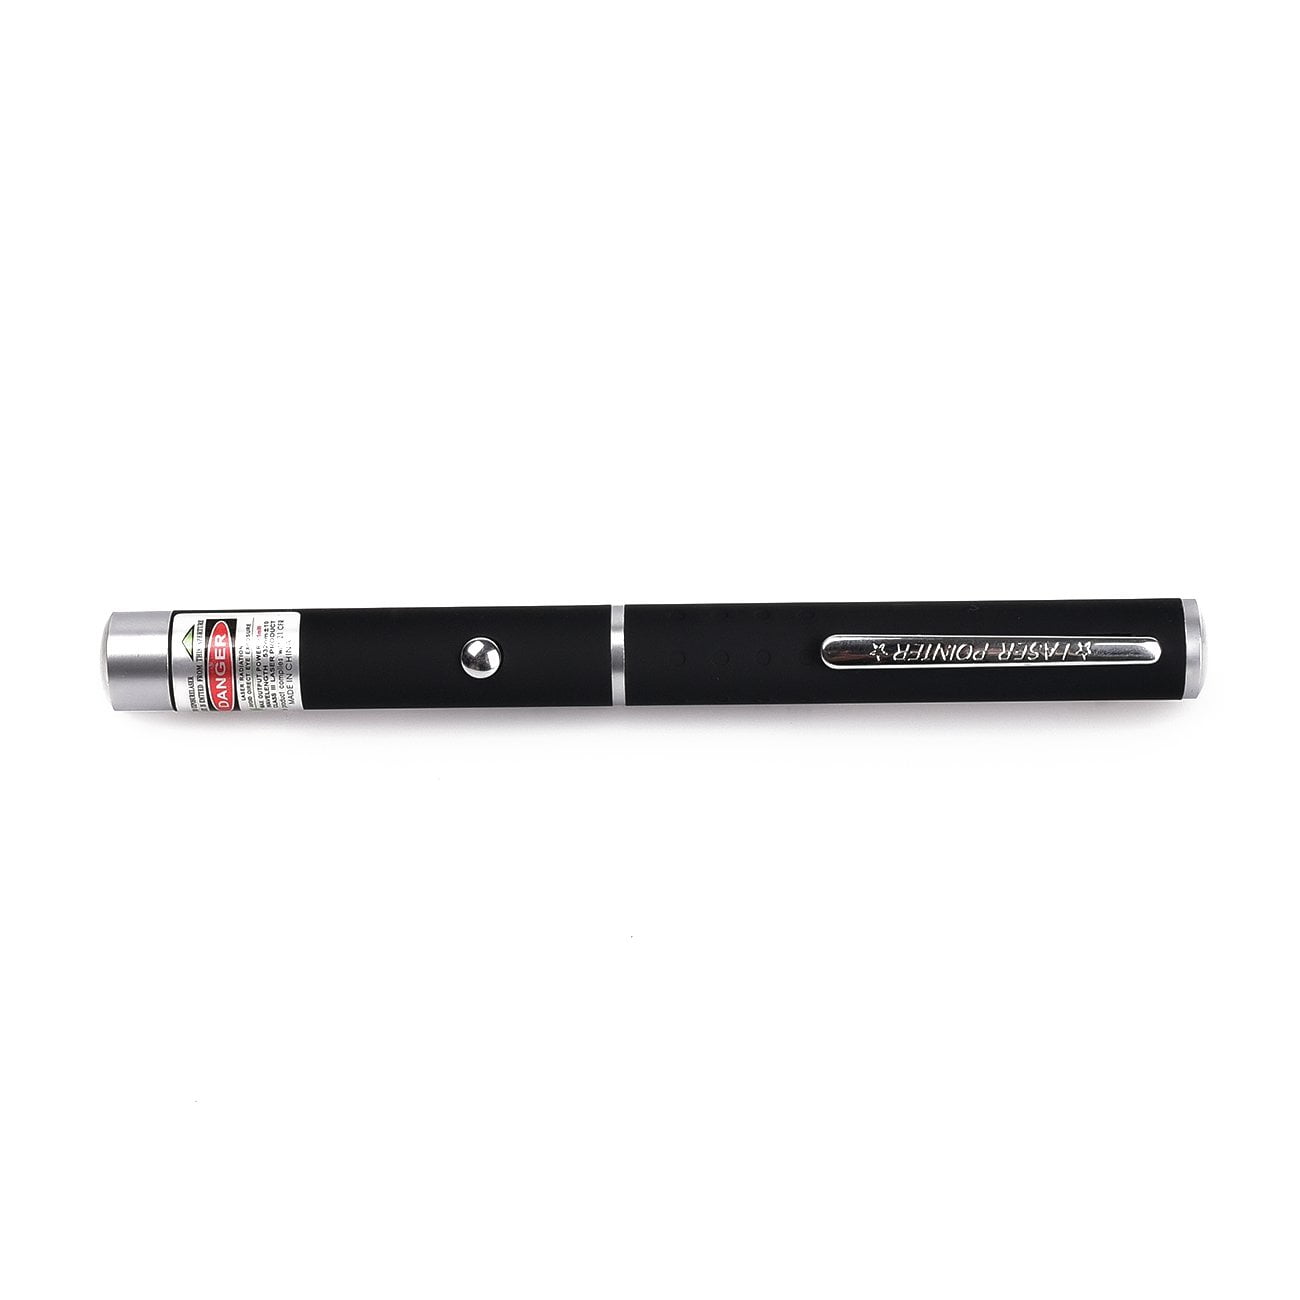 Details about   Astronomy High Power Green Laser Pointer Pen 532nm Lazer Adjustable Visible beam 